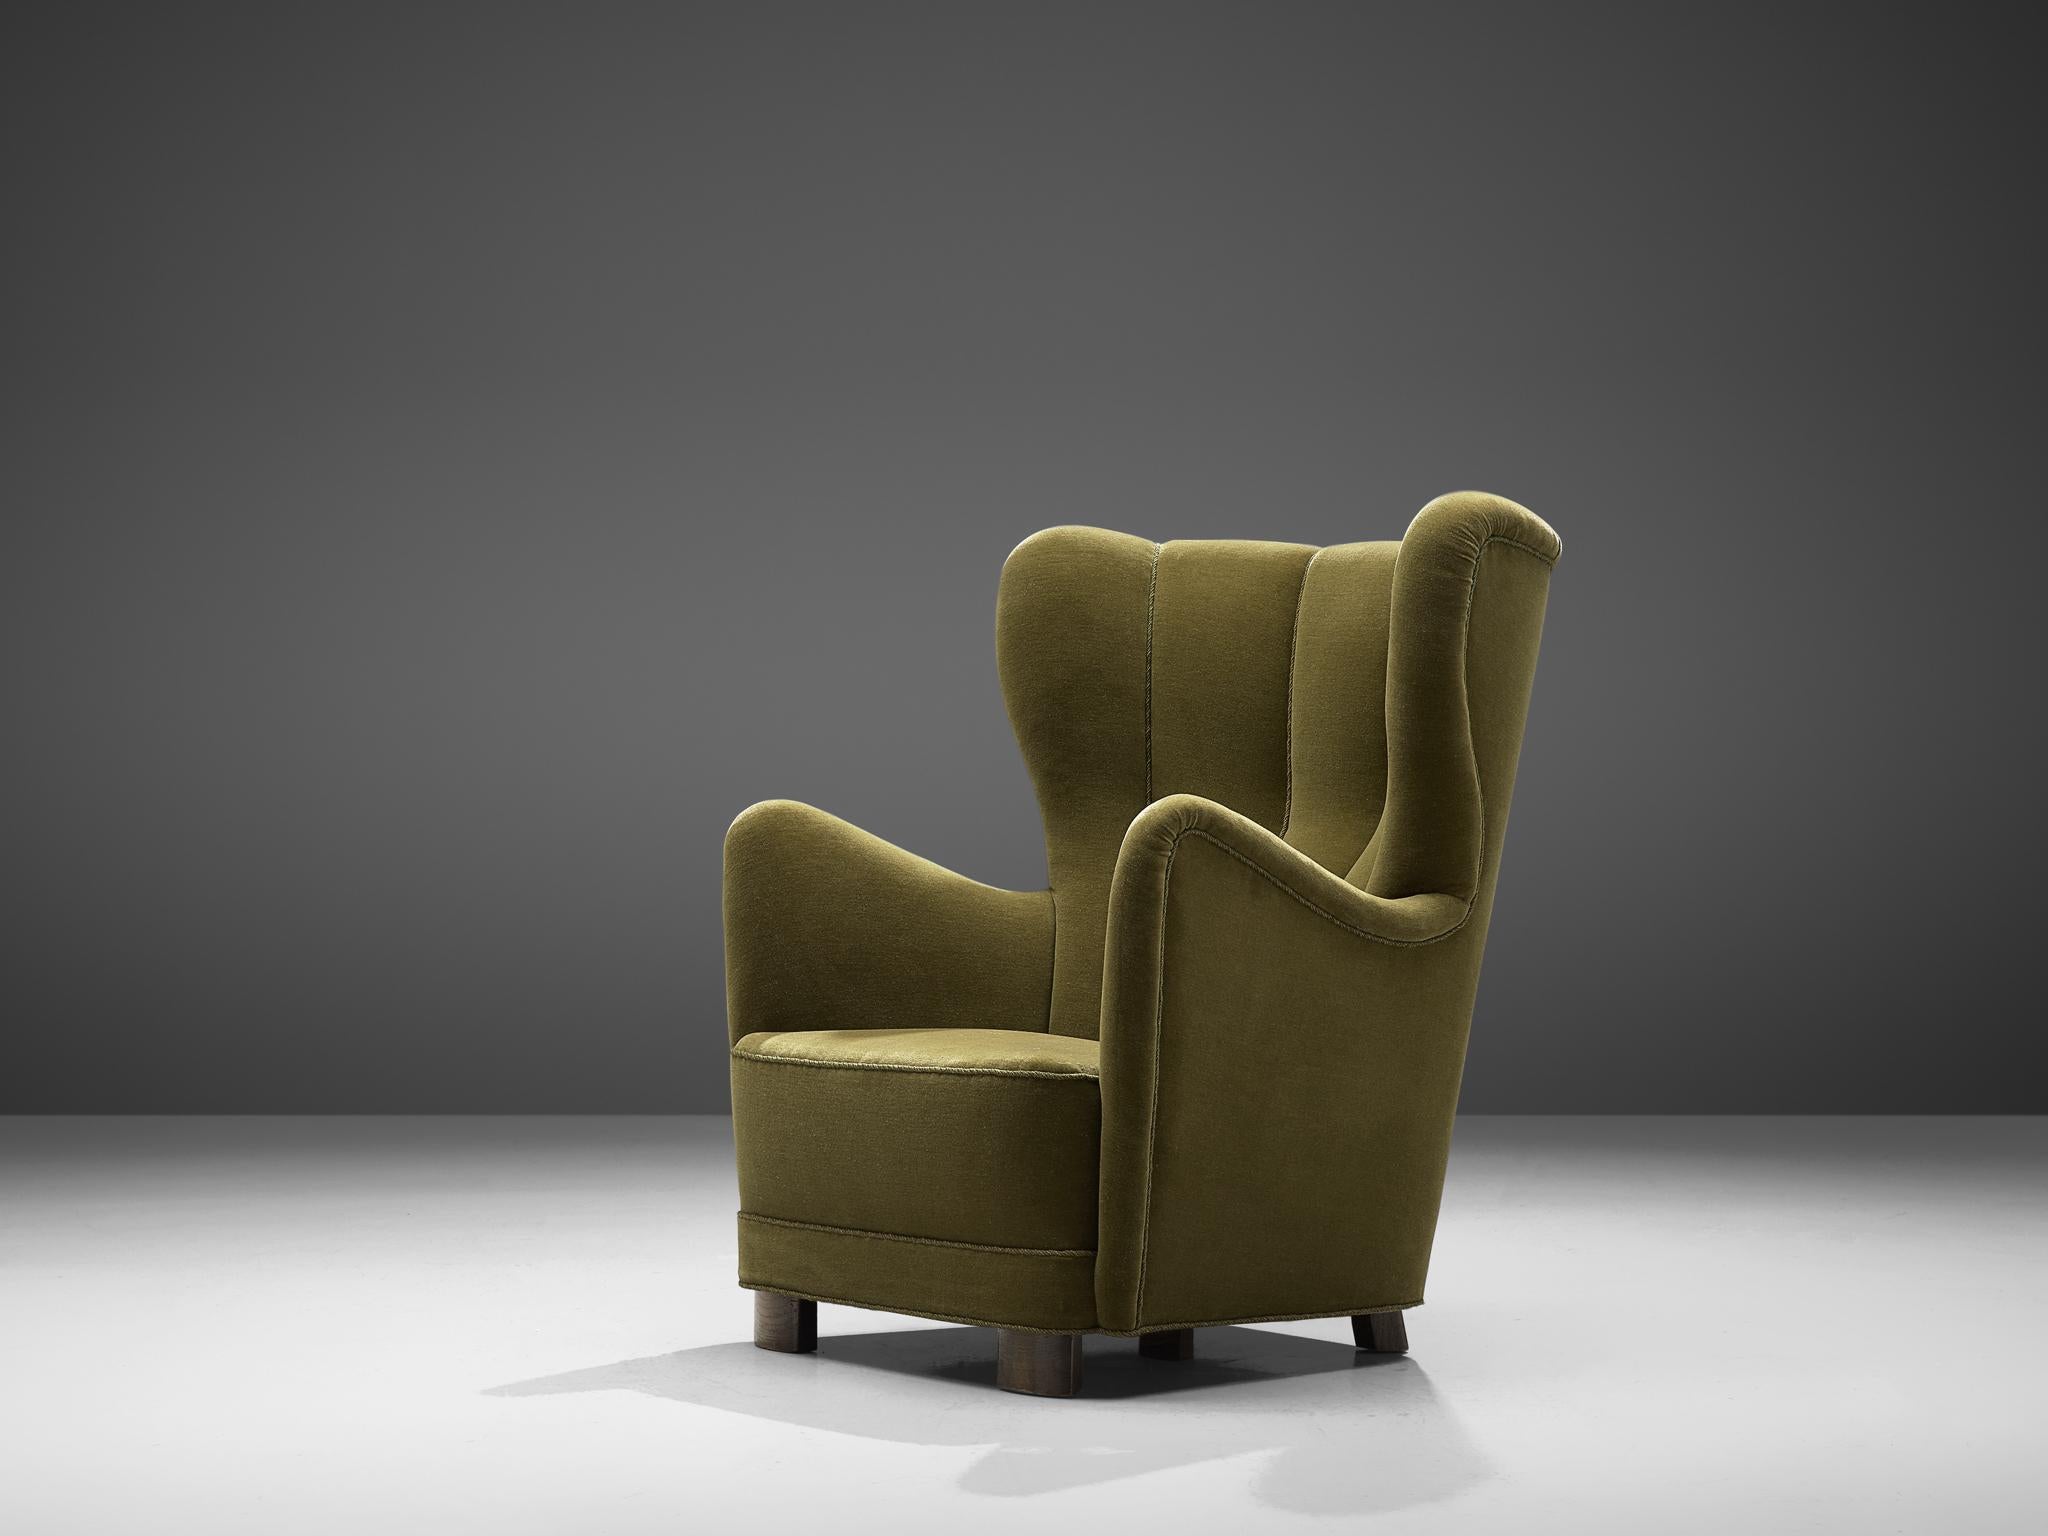 Lounge chair, beech legs and green fabric, Denmark, 1940s

This stately easy chair with high back that originates from the 1940s, is the predecessor of what came to be known as modern Danish design that it is today, featuring organic forms and